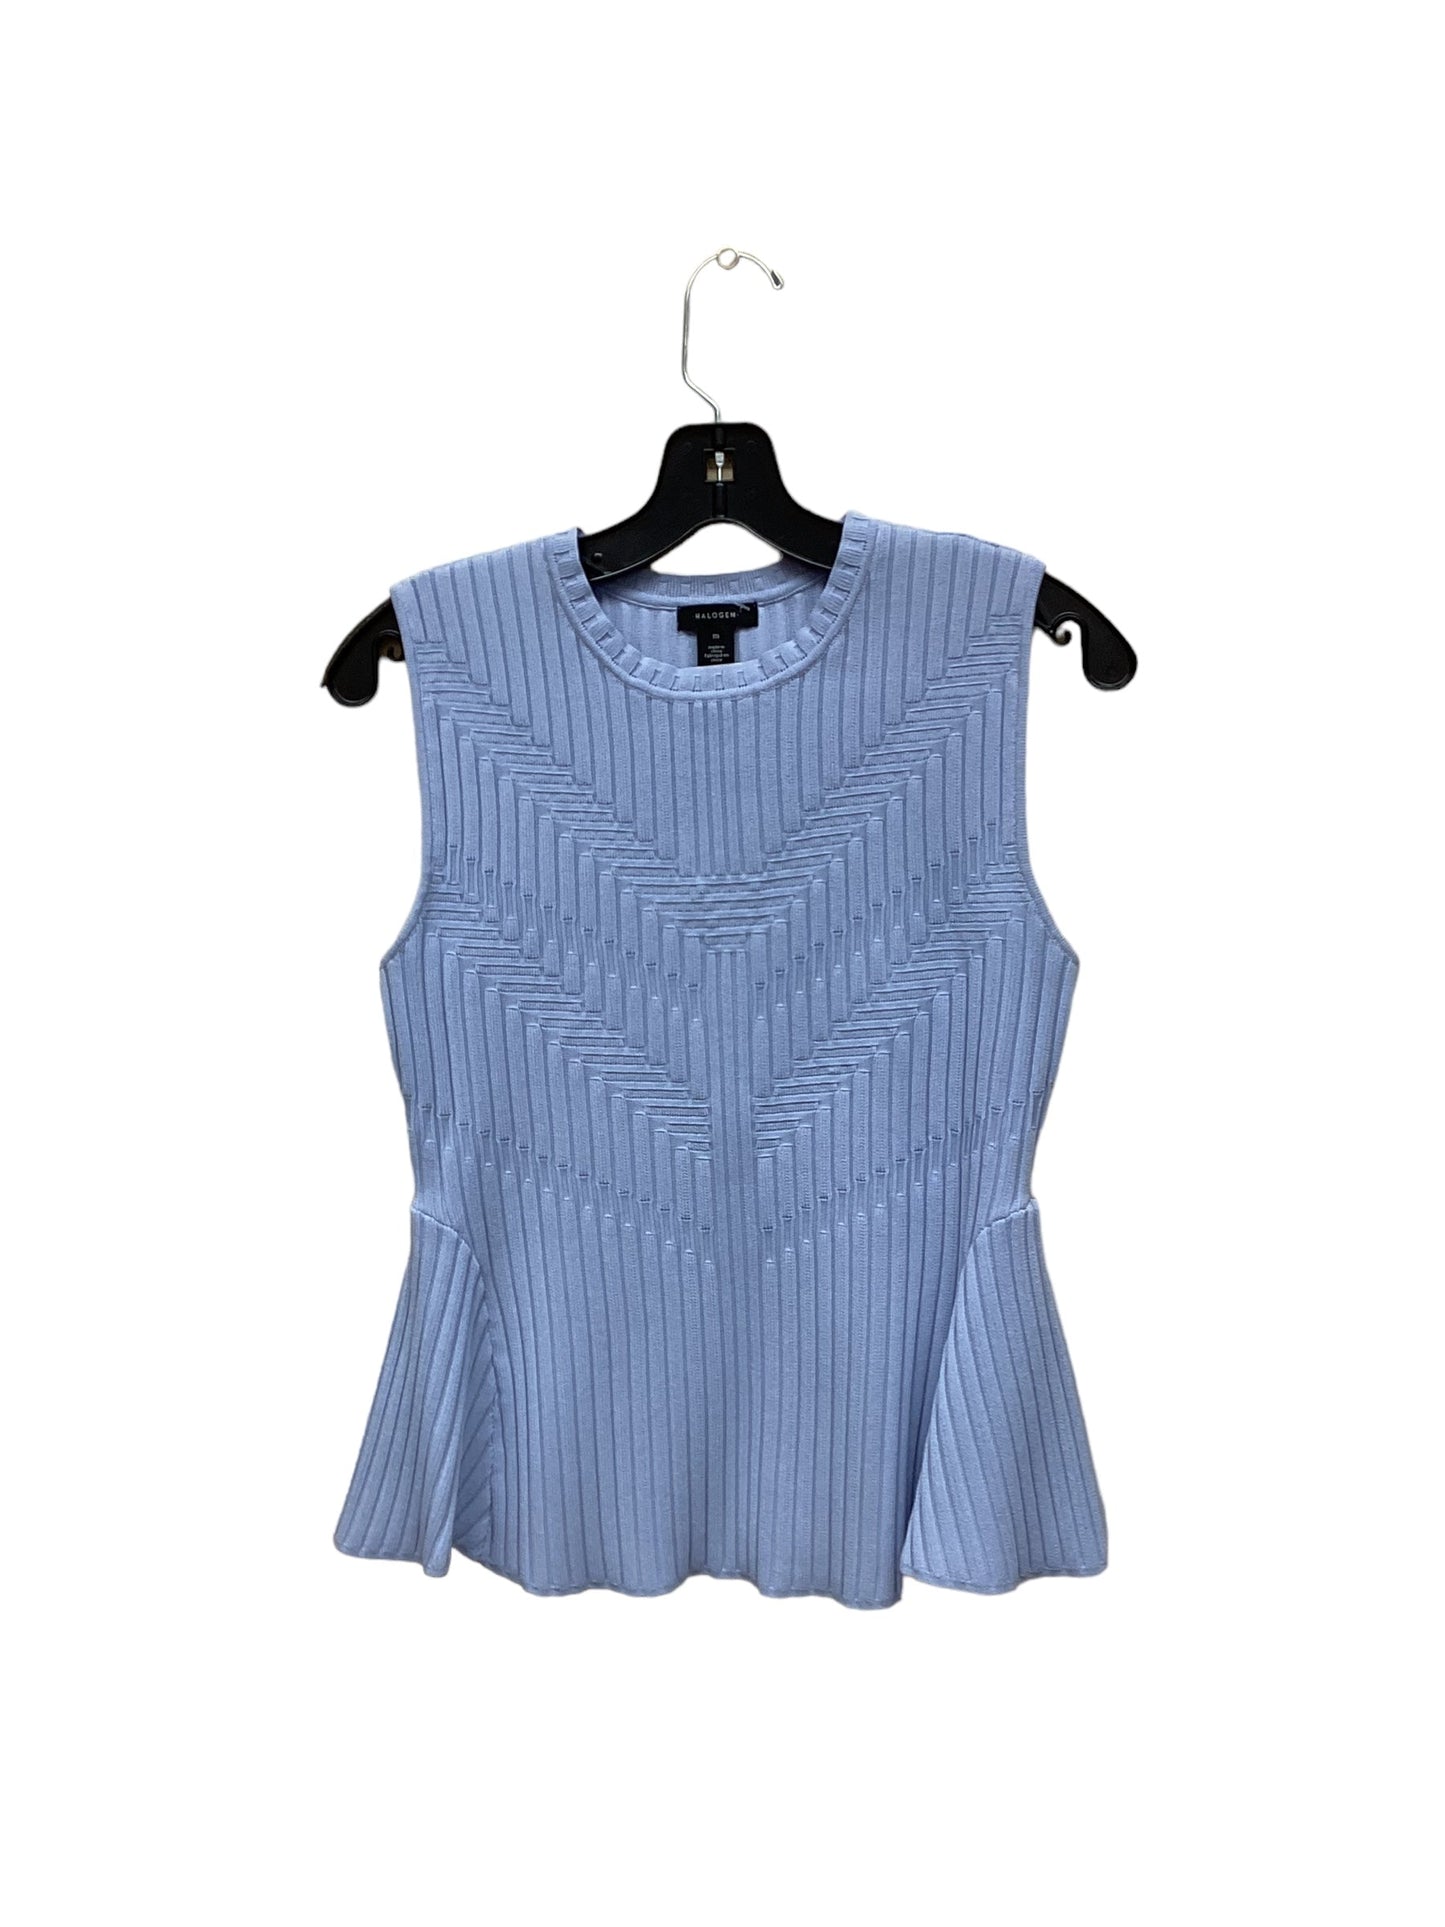 Top Sleeveless By Halogen  Size: M